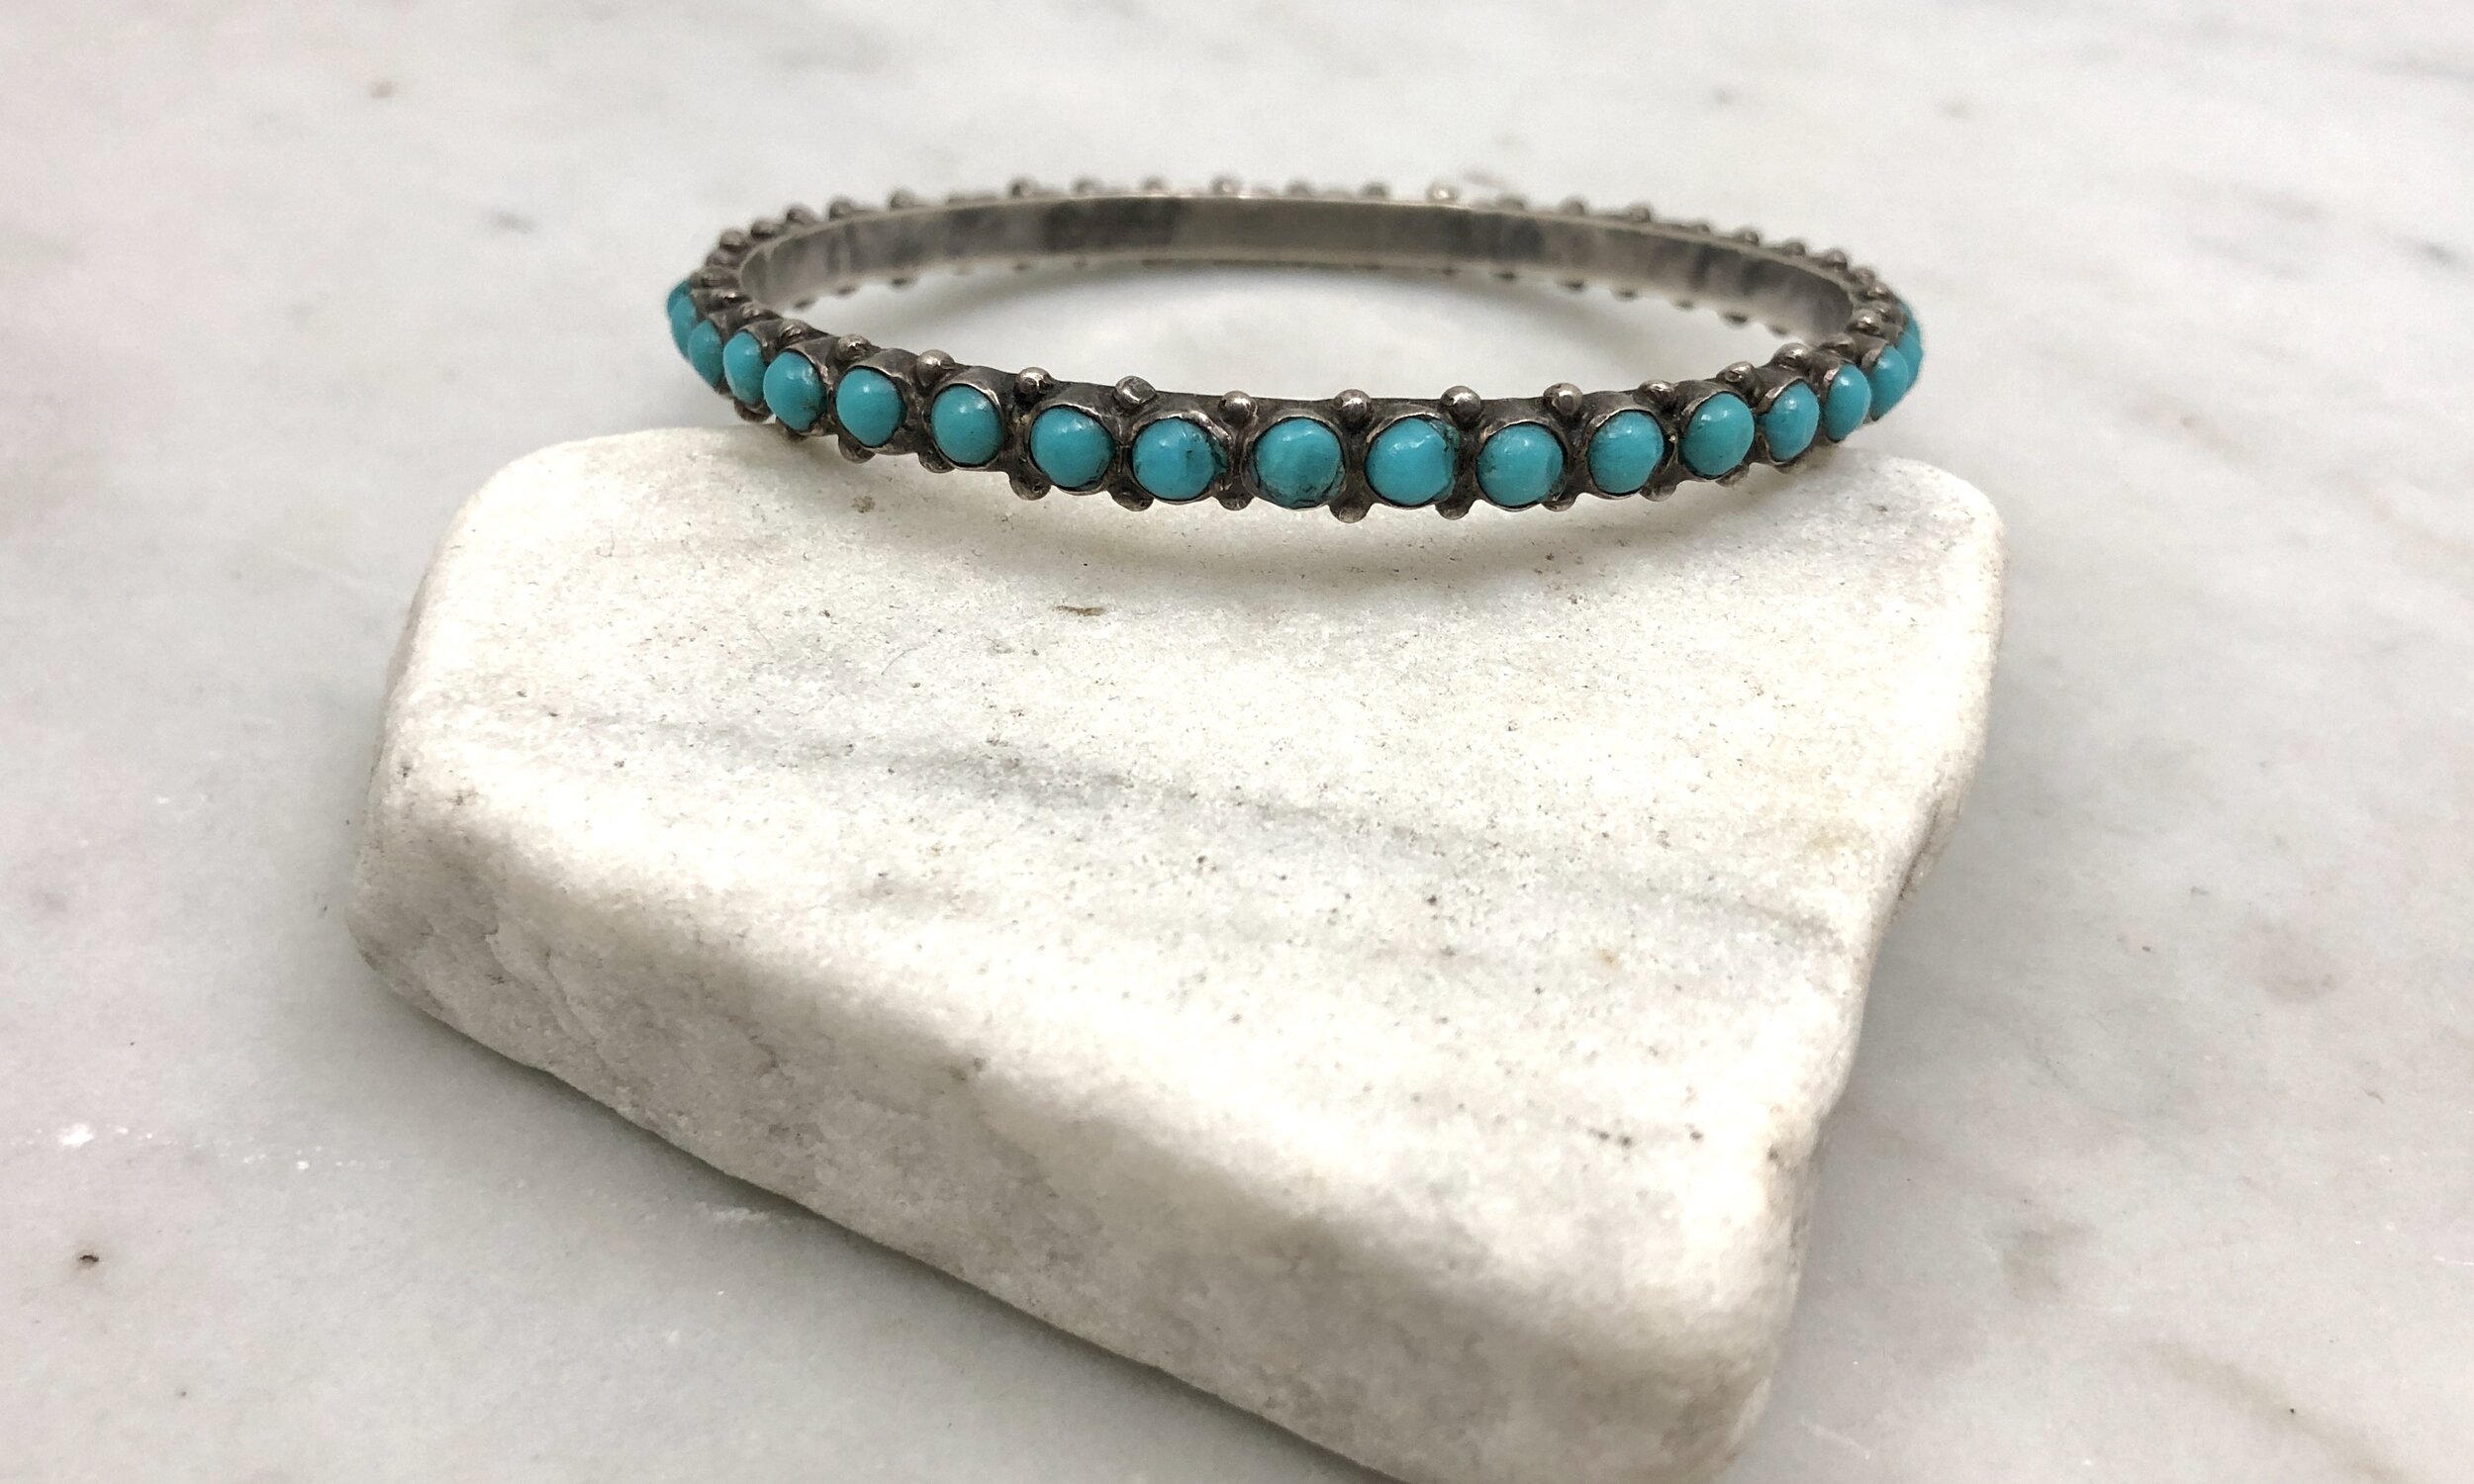 Vintage Mexican Silver Faux Turquoise Bangle Bracelet — Worn-Over-Time